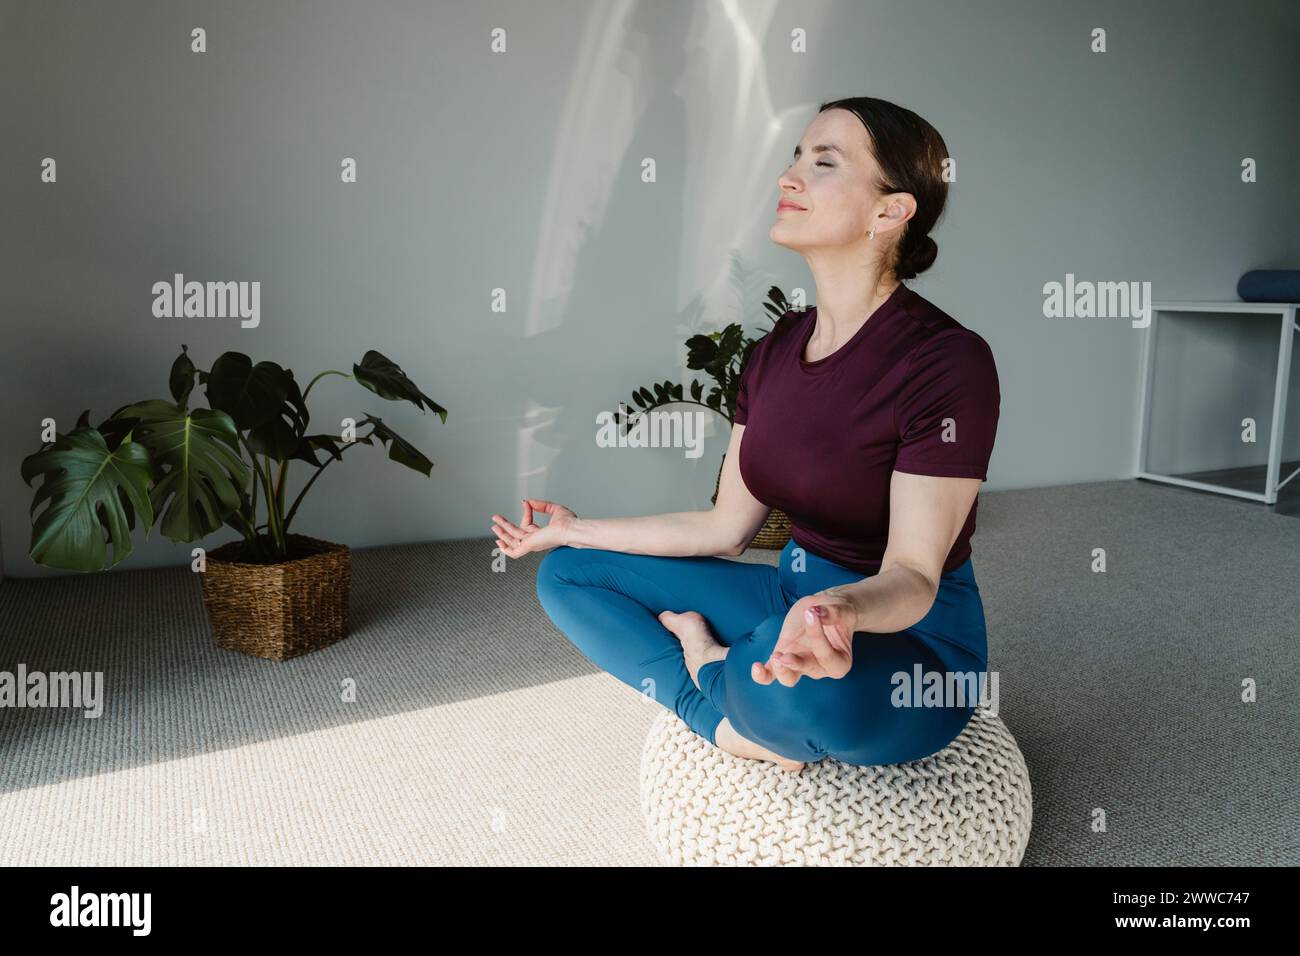 Smiling woman meditating on seat at home Stock Photo